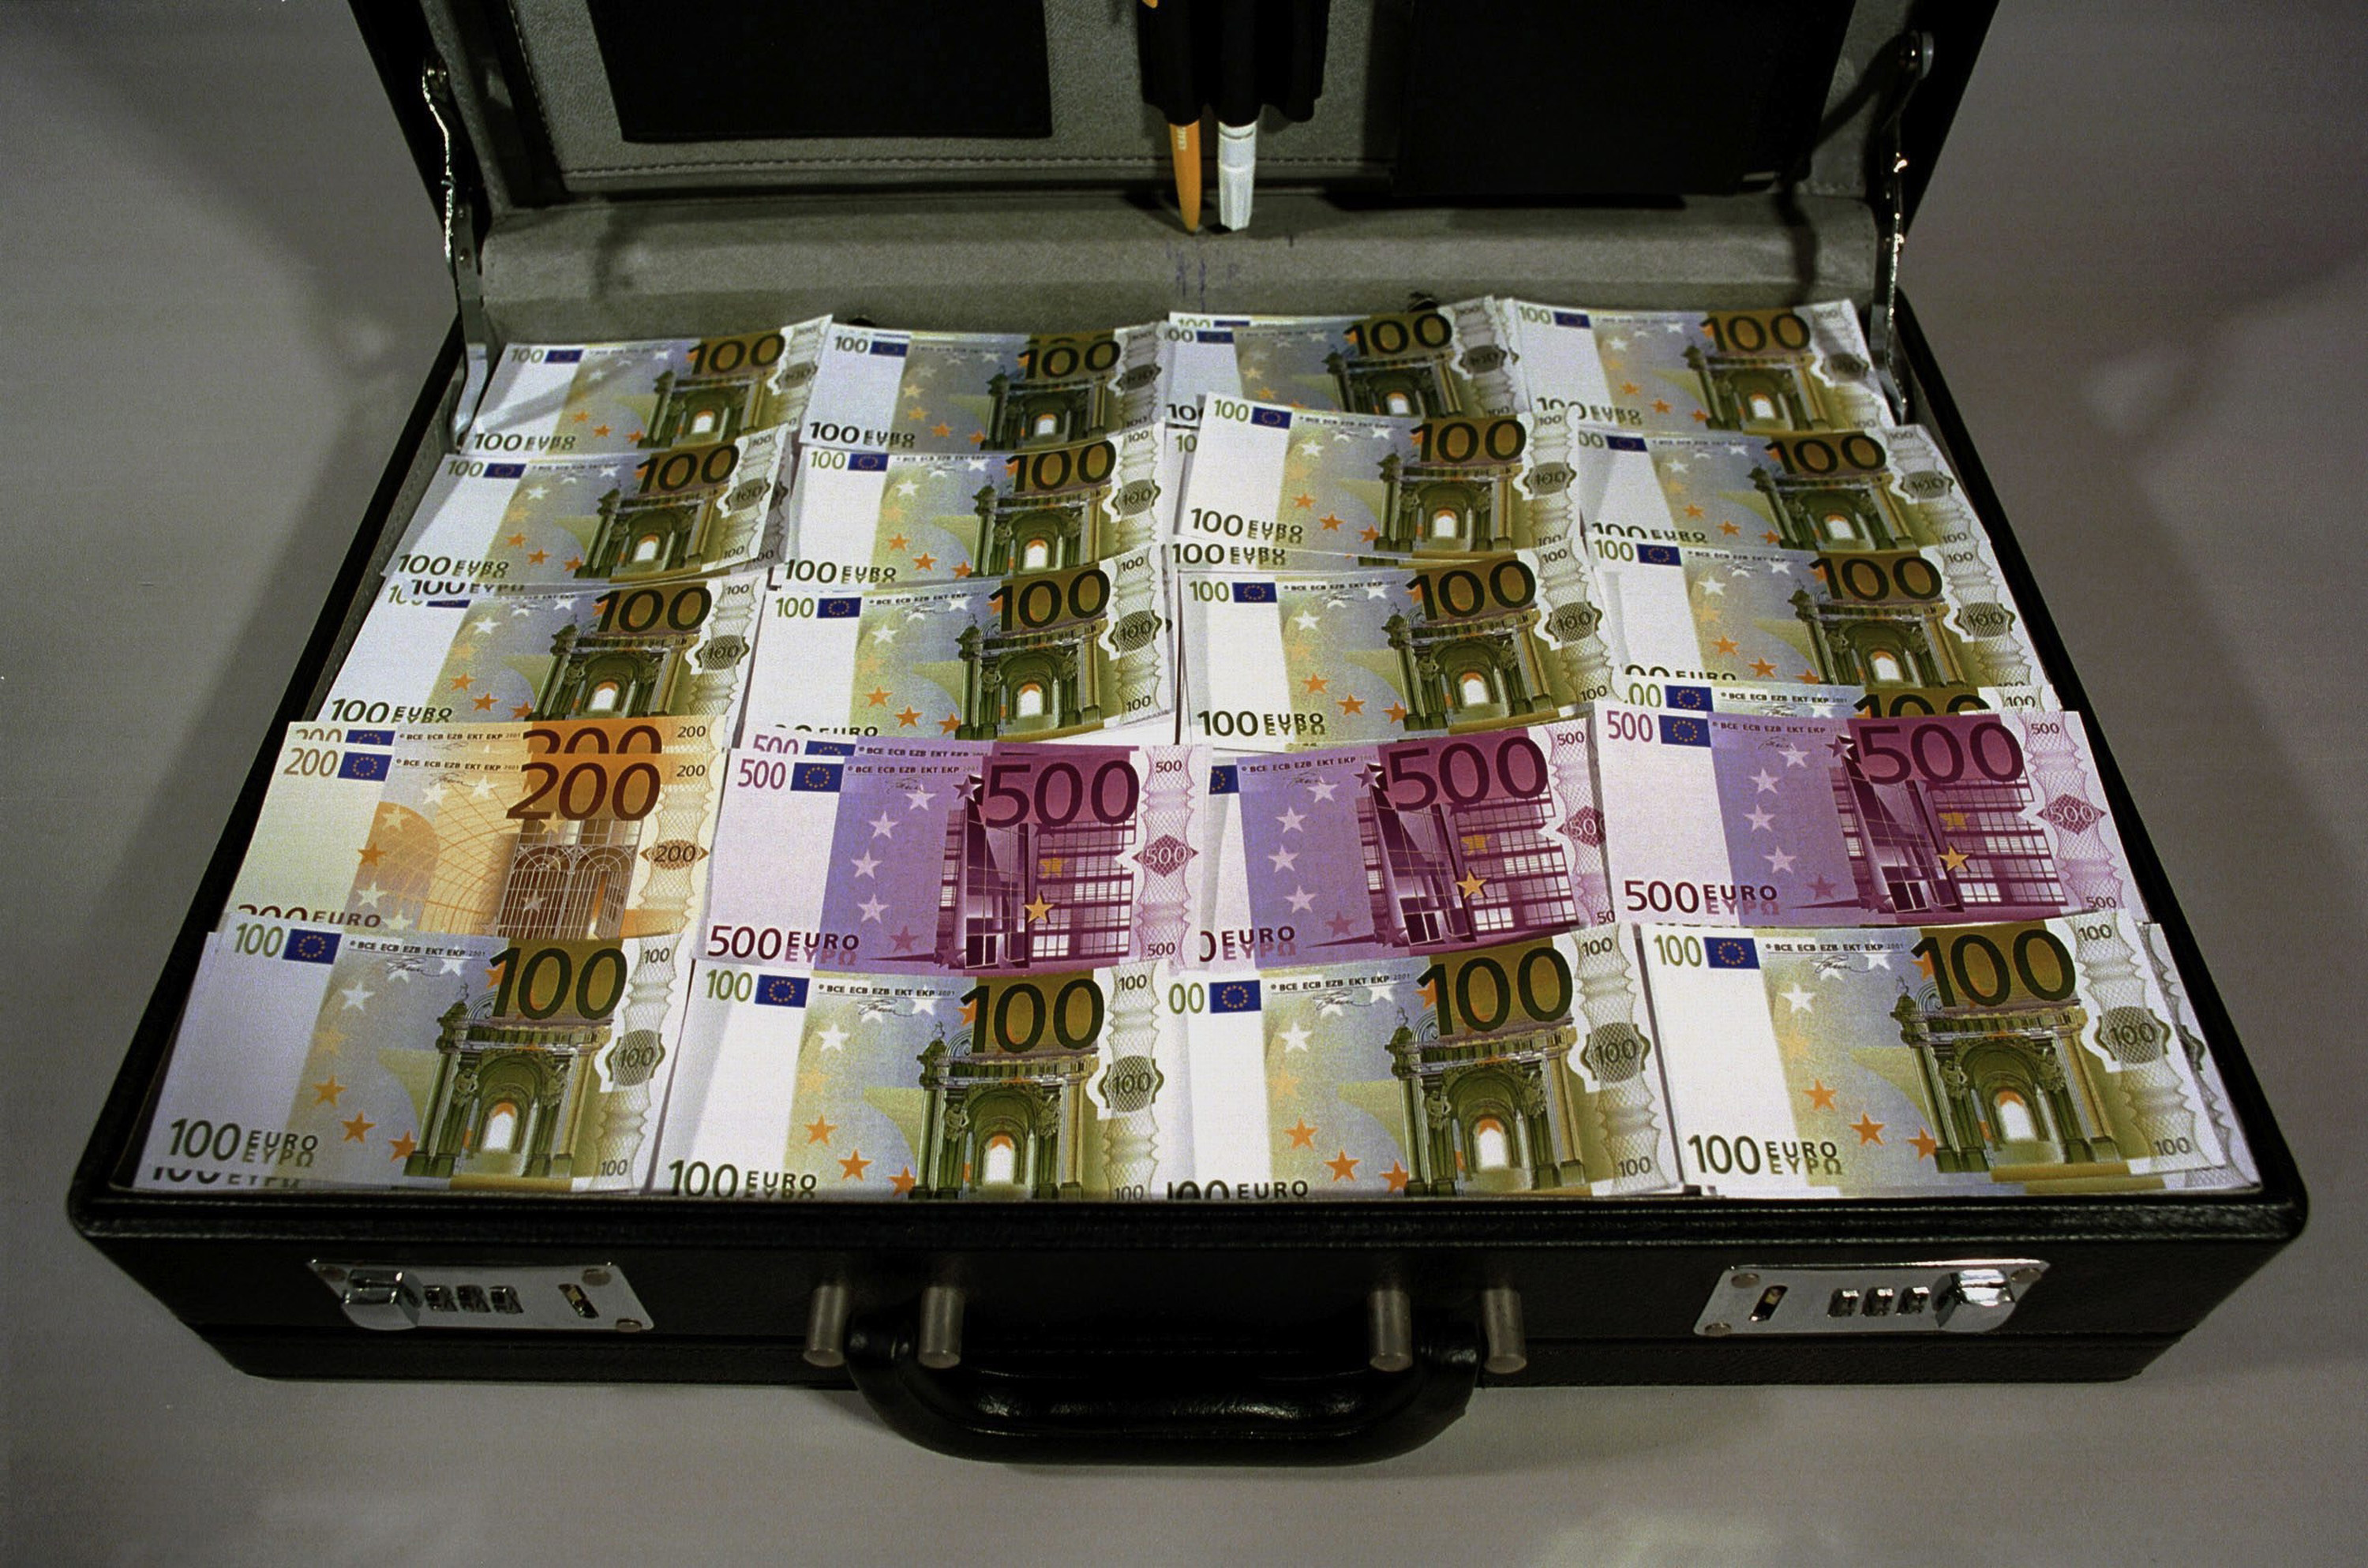 Executive briefcase filled with 100, 200 and 500 Euro notes.